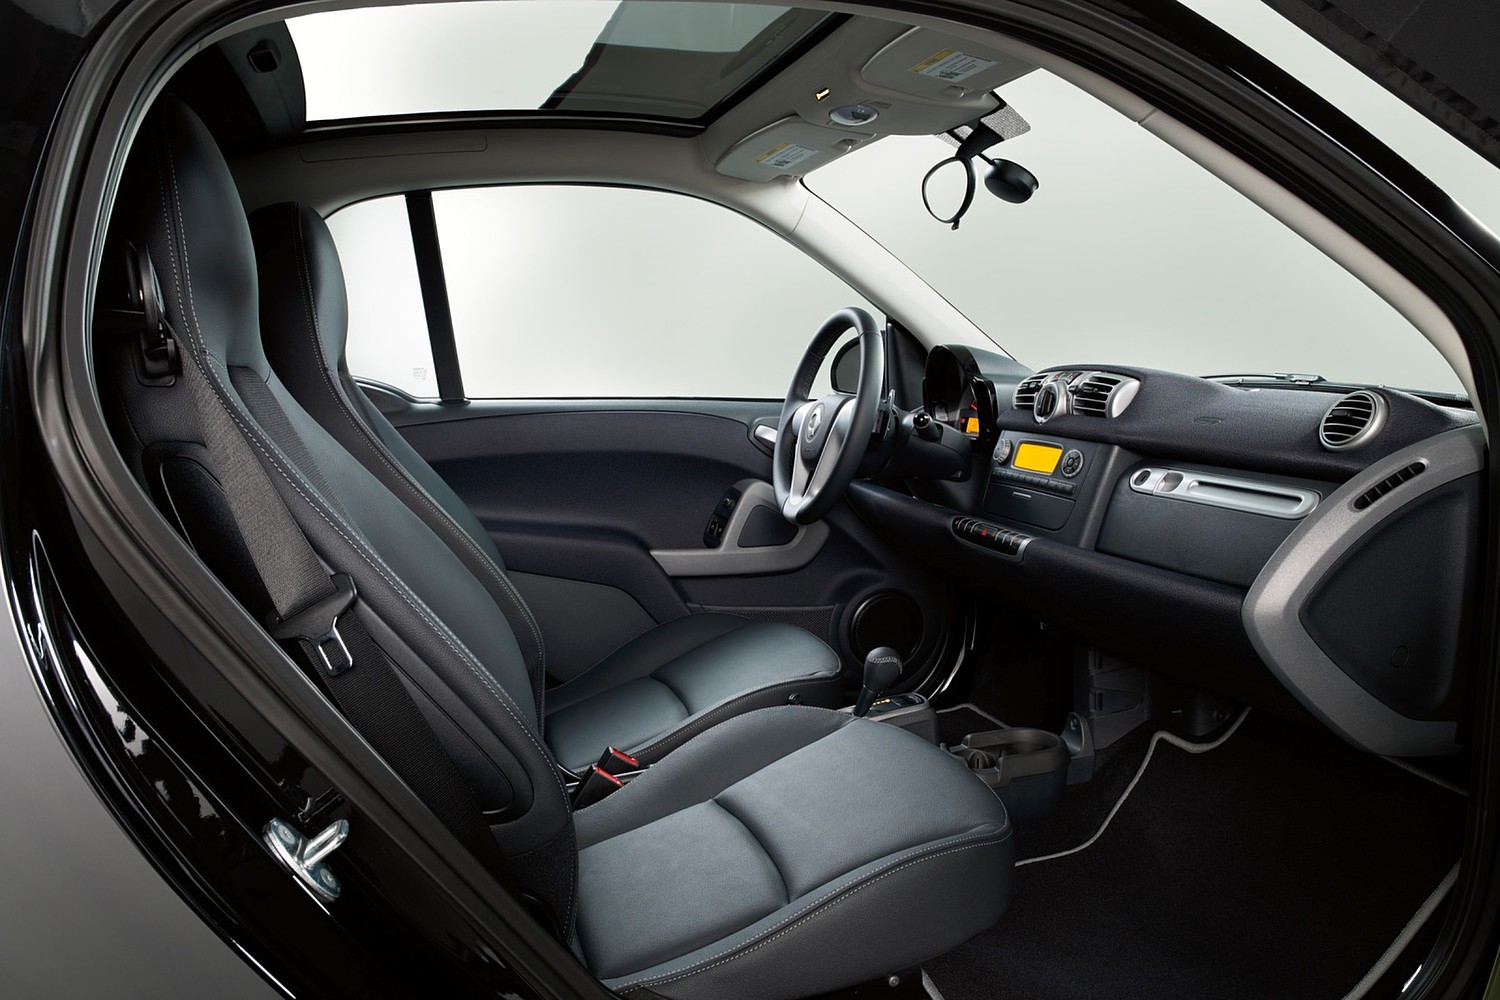 smart fortwo passion coupe 2dr Hatchback Interior (2013 model year shown)